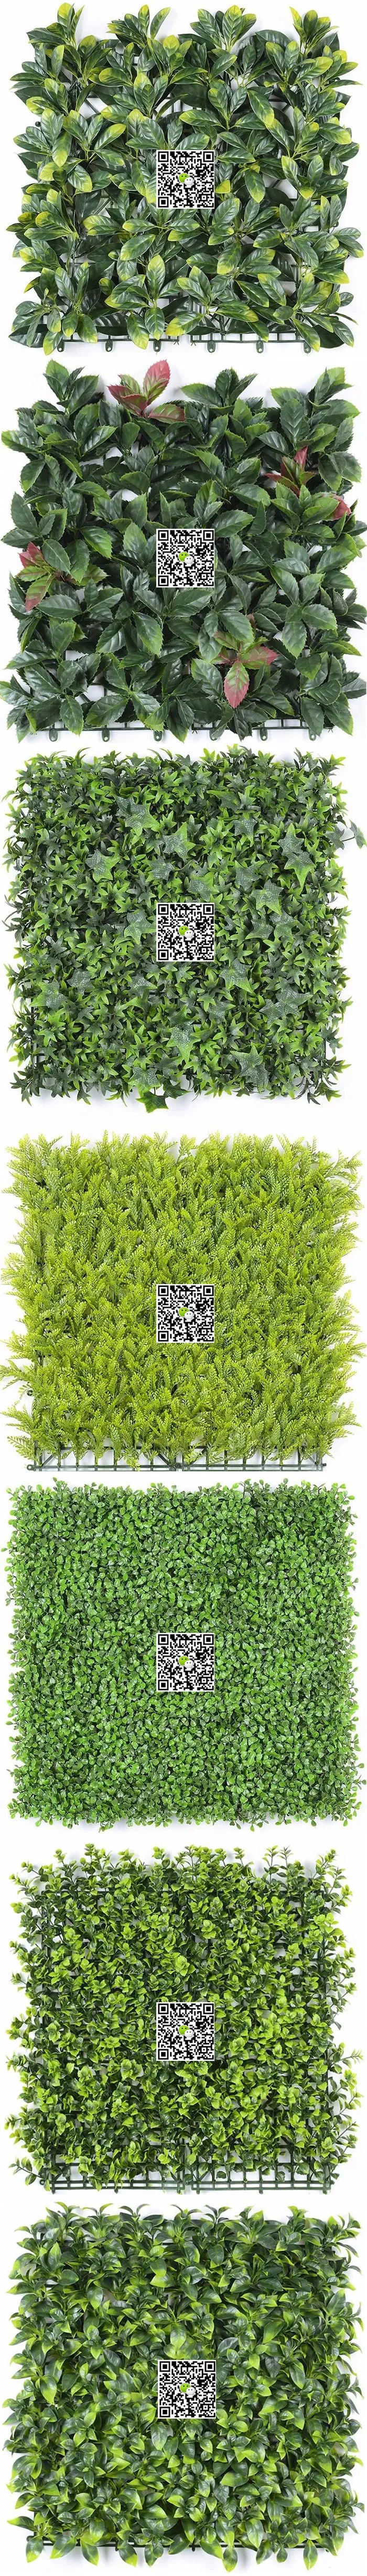 Artificial Boxwood Plastic IVY Green Wall Vertical Garden Fence for Interior Exterior Landscaping